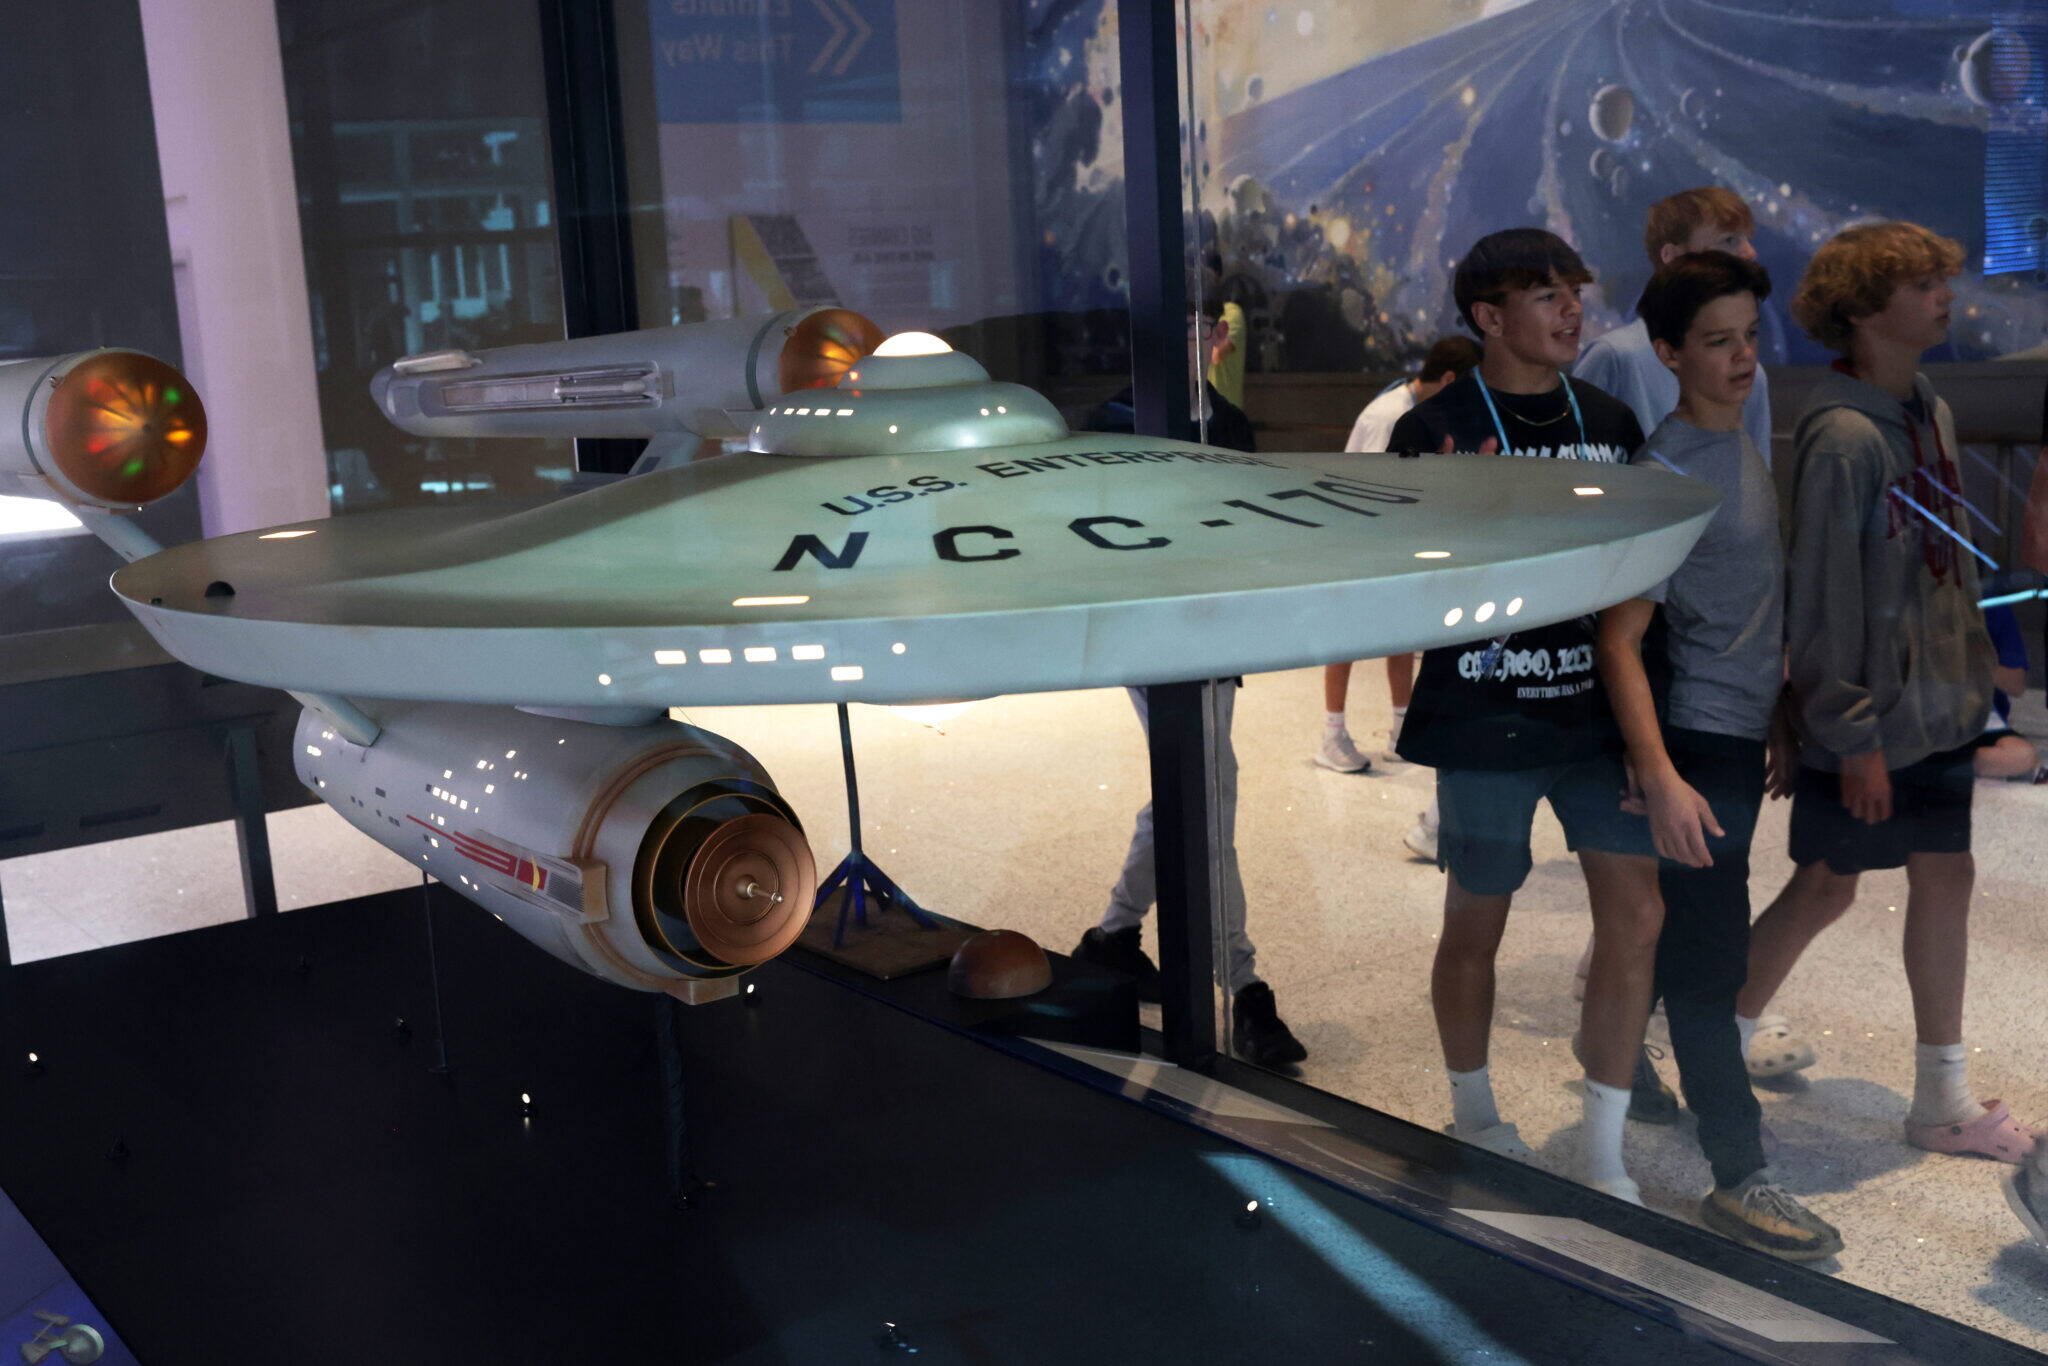 The studio model of Starship “Enterprise” from Star Trek is on display at The Smithsonian National Air and Space Museum on its reopening on Oct. 14, 2022, in Washington, DC. (Photo by Alex Wong/Getty Images)